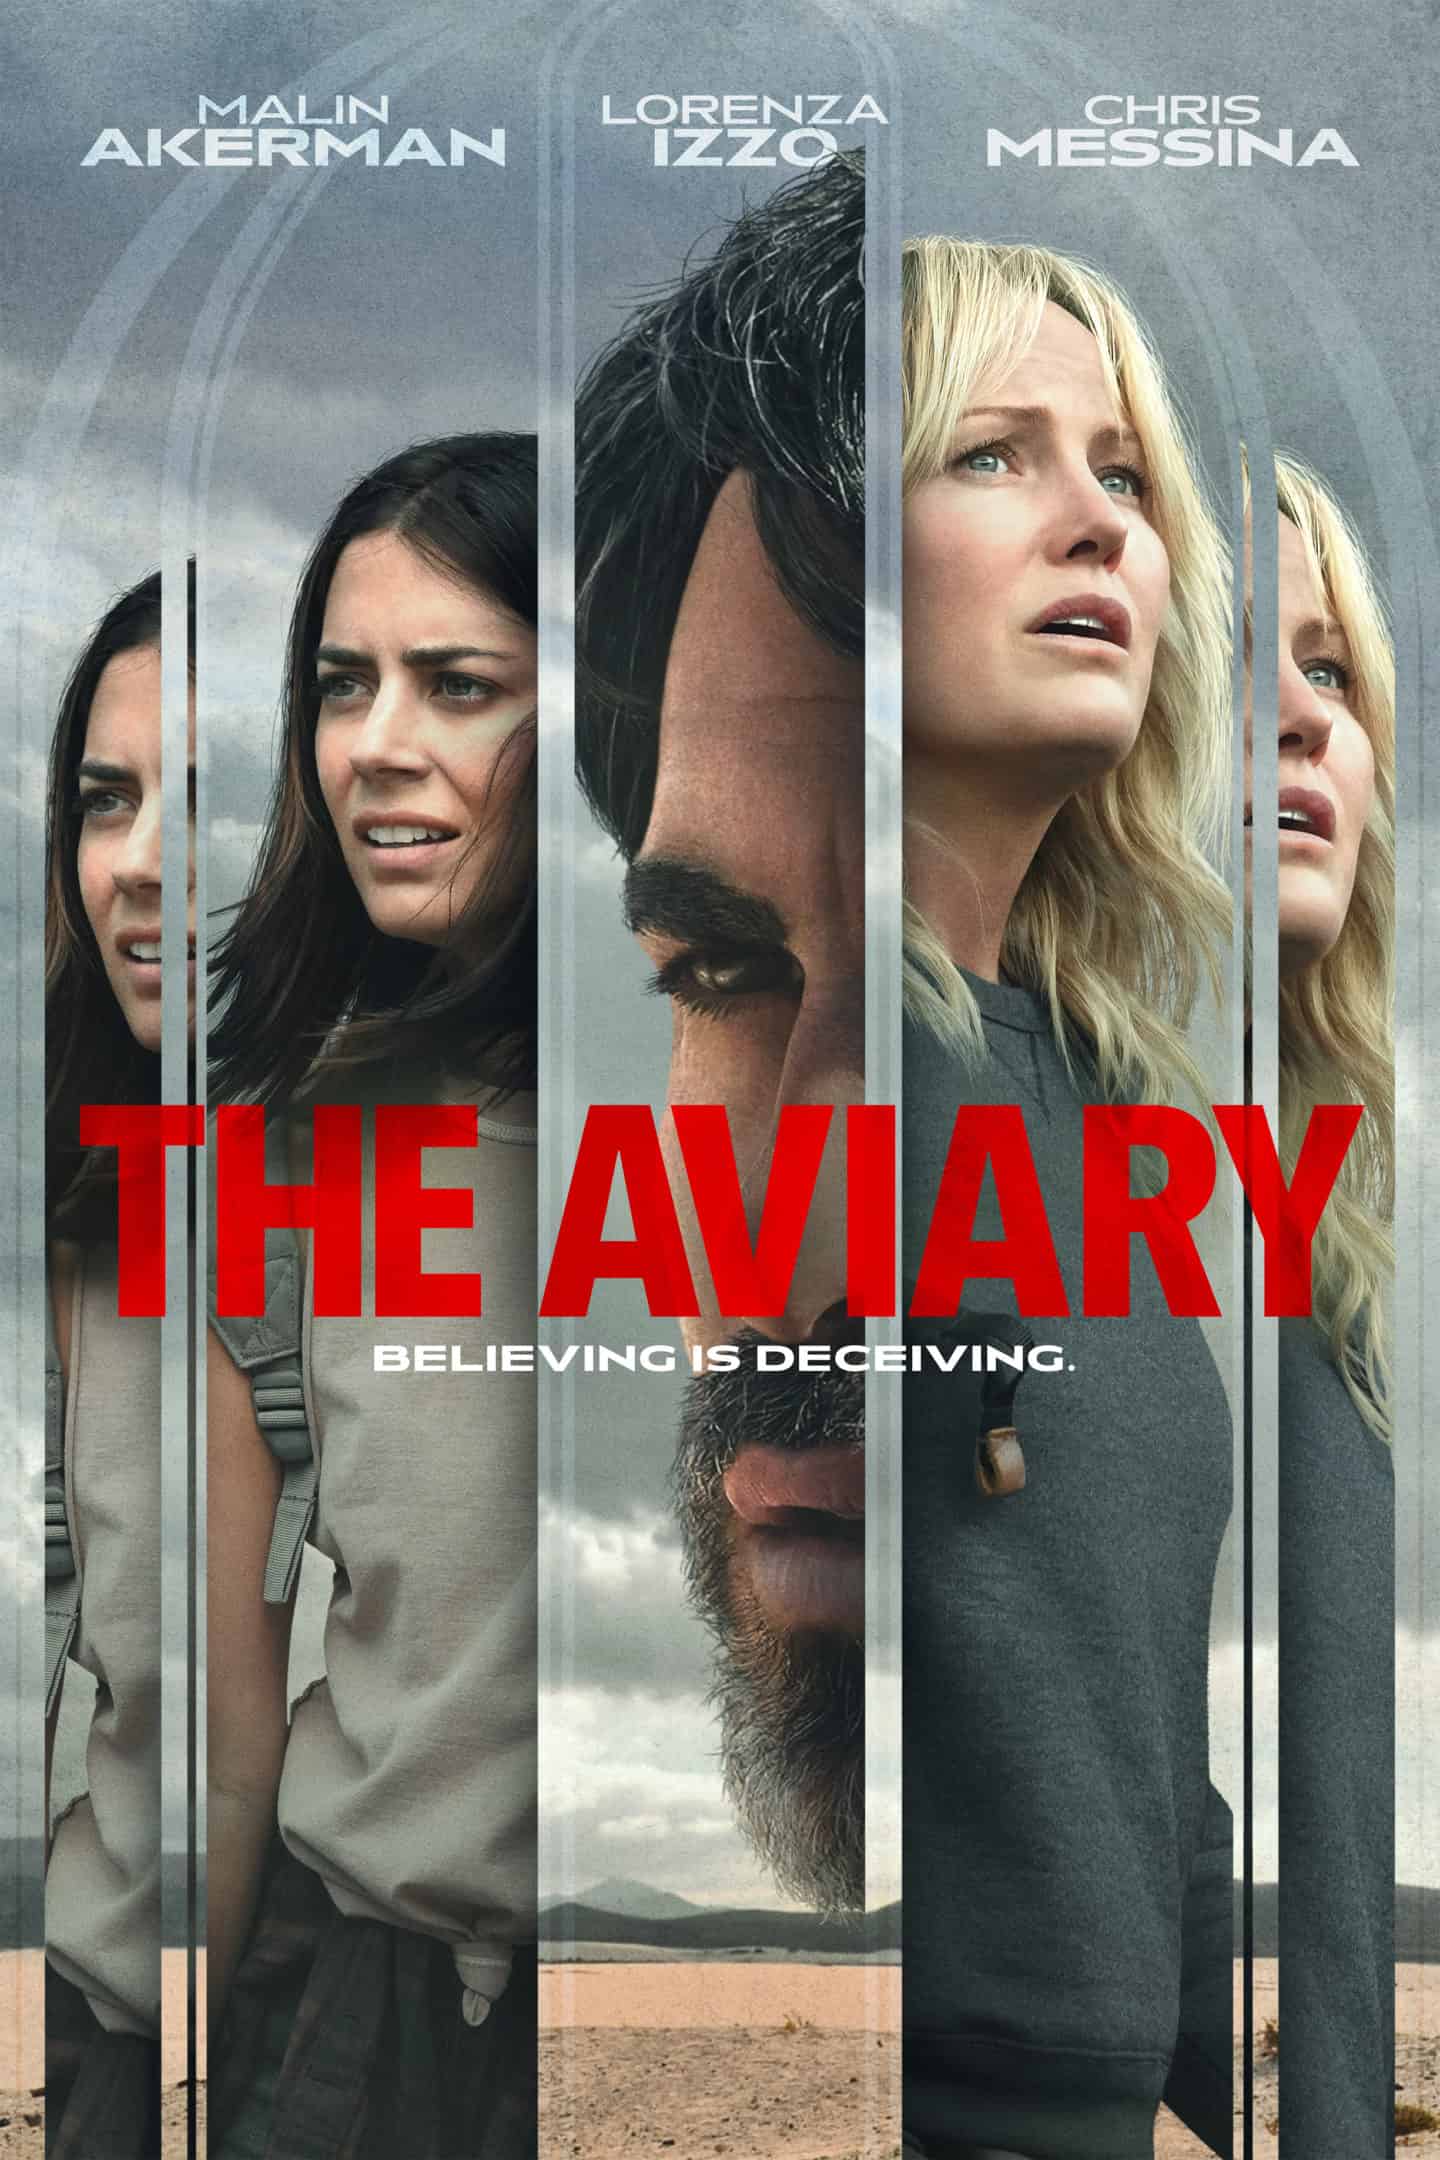 The Aviary comes to Digital and On Demand on April 29th 2